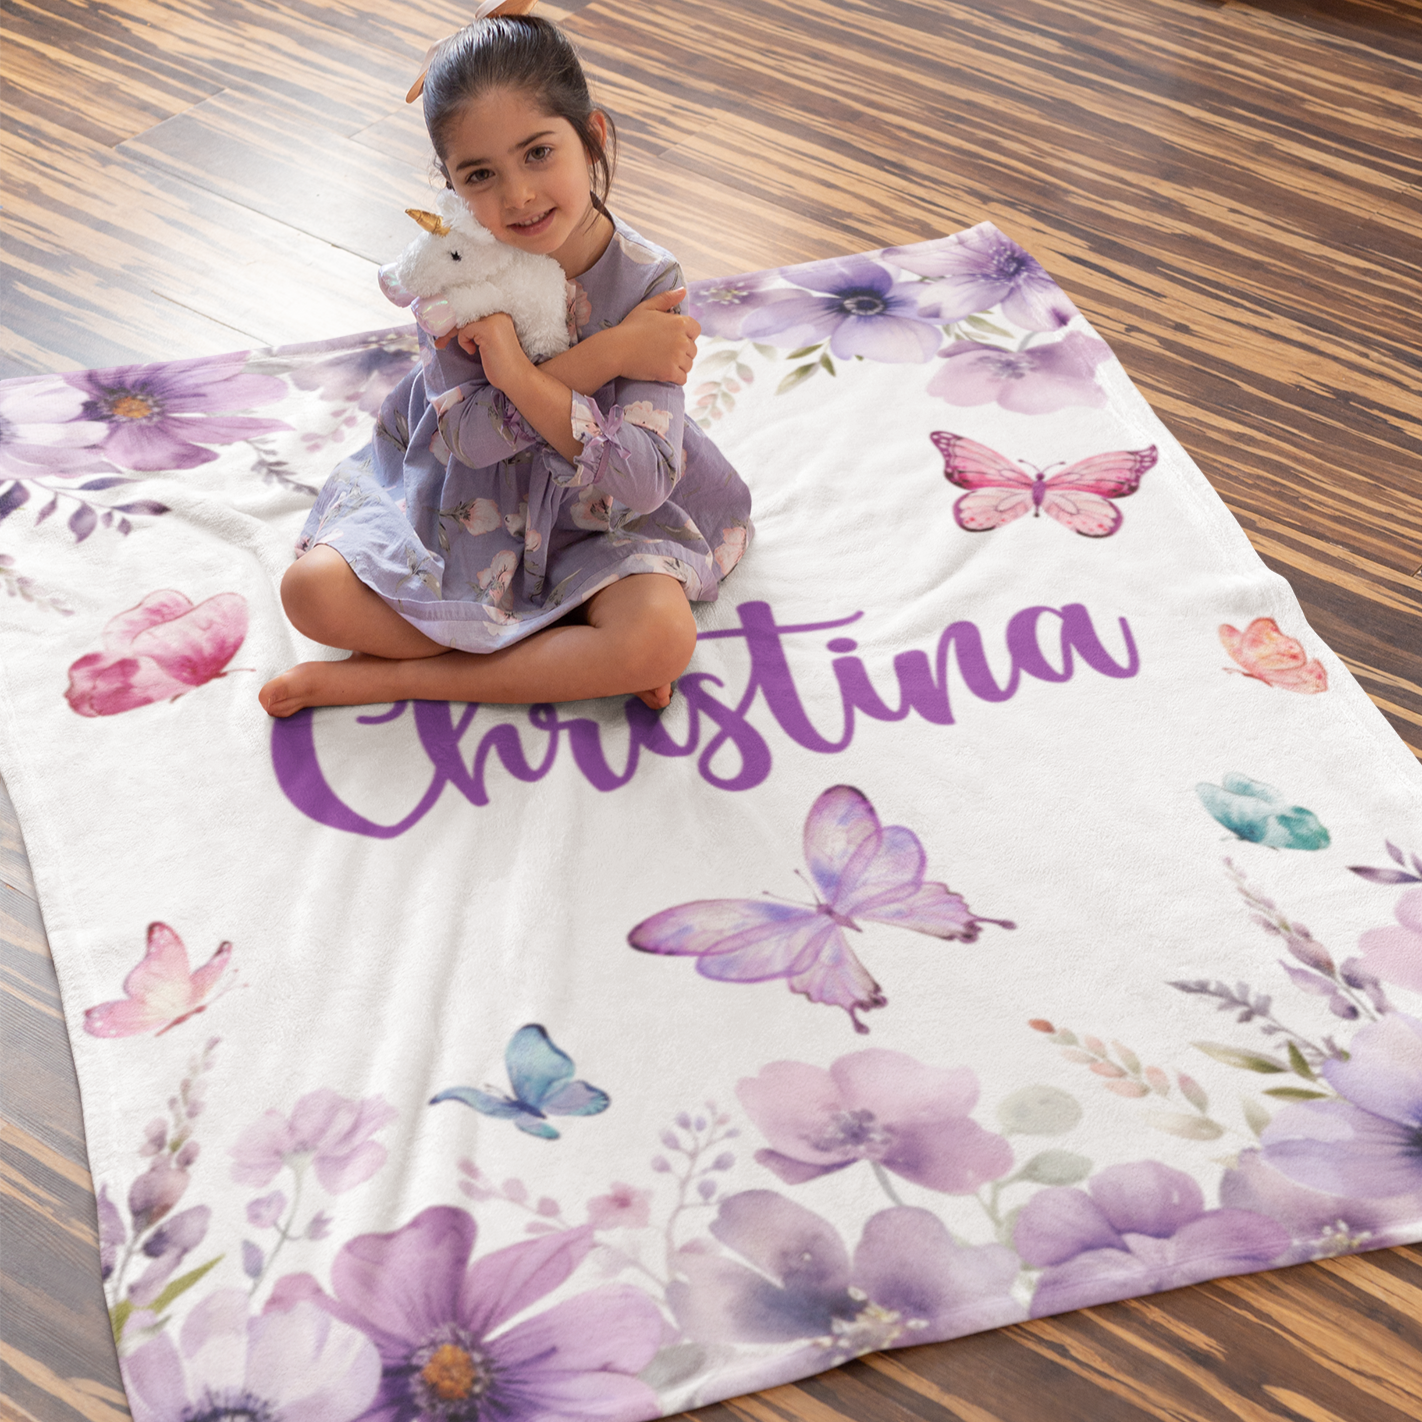 Personalized Watercolor Purple Butterfly  Baby Name Blanket - Gift for baby